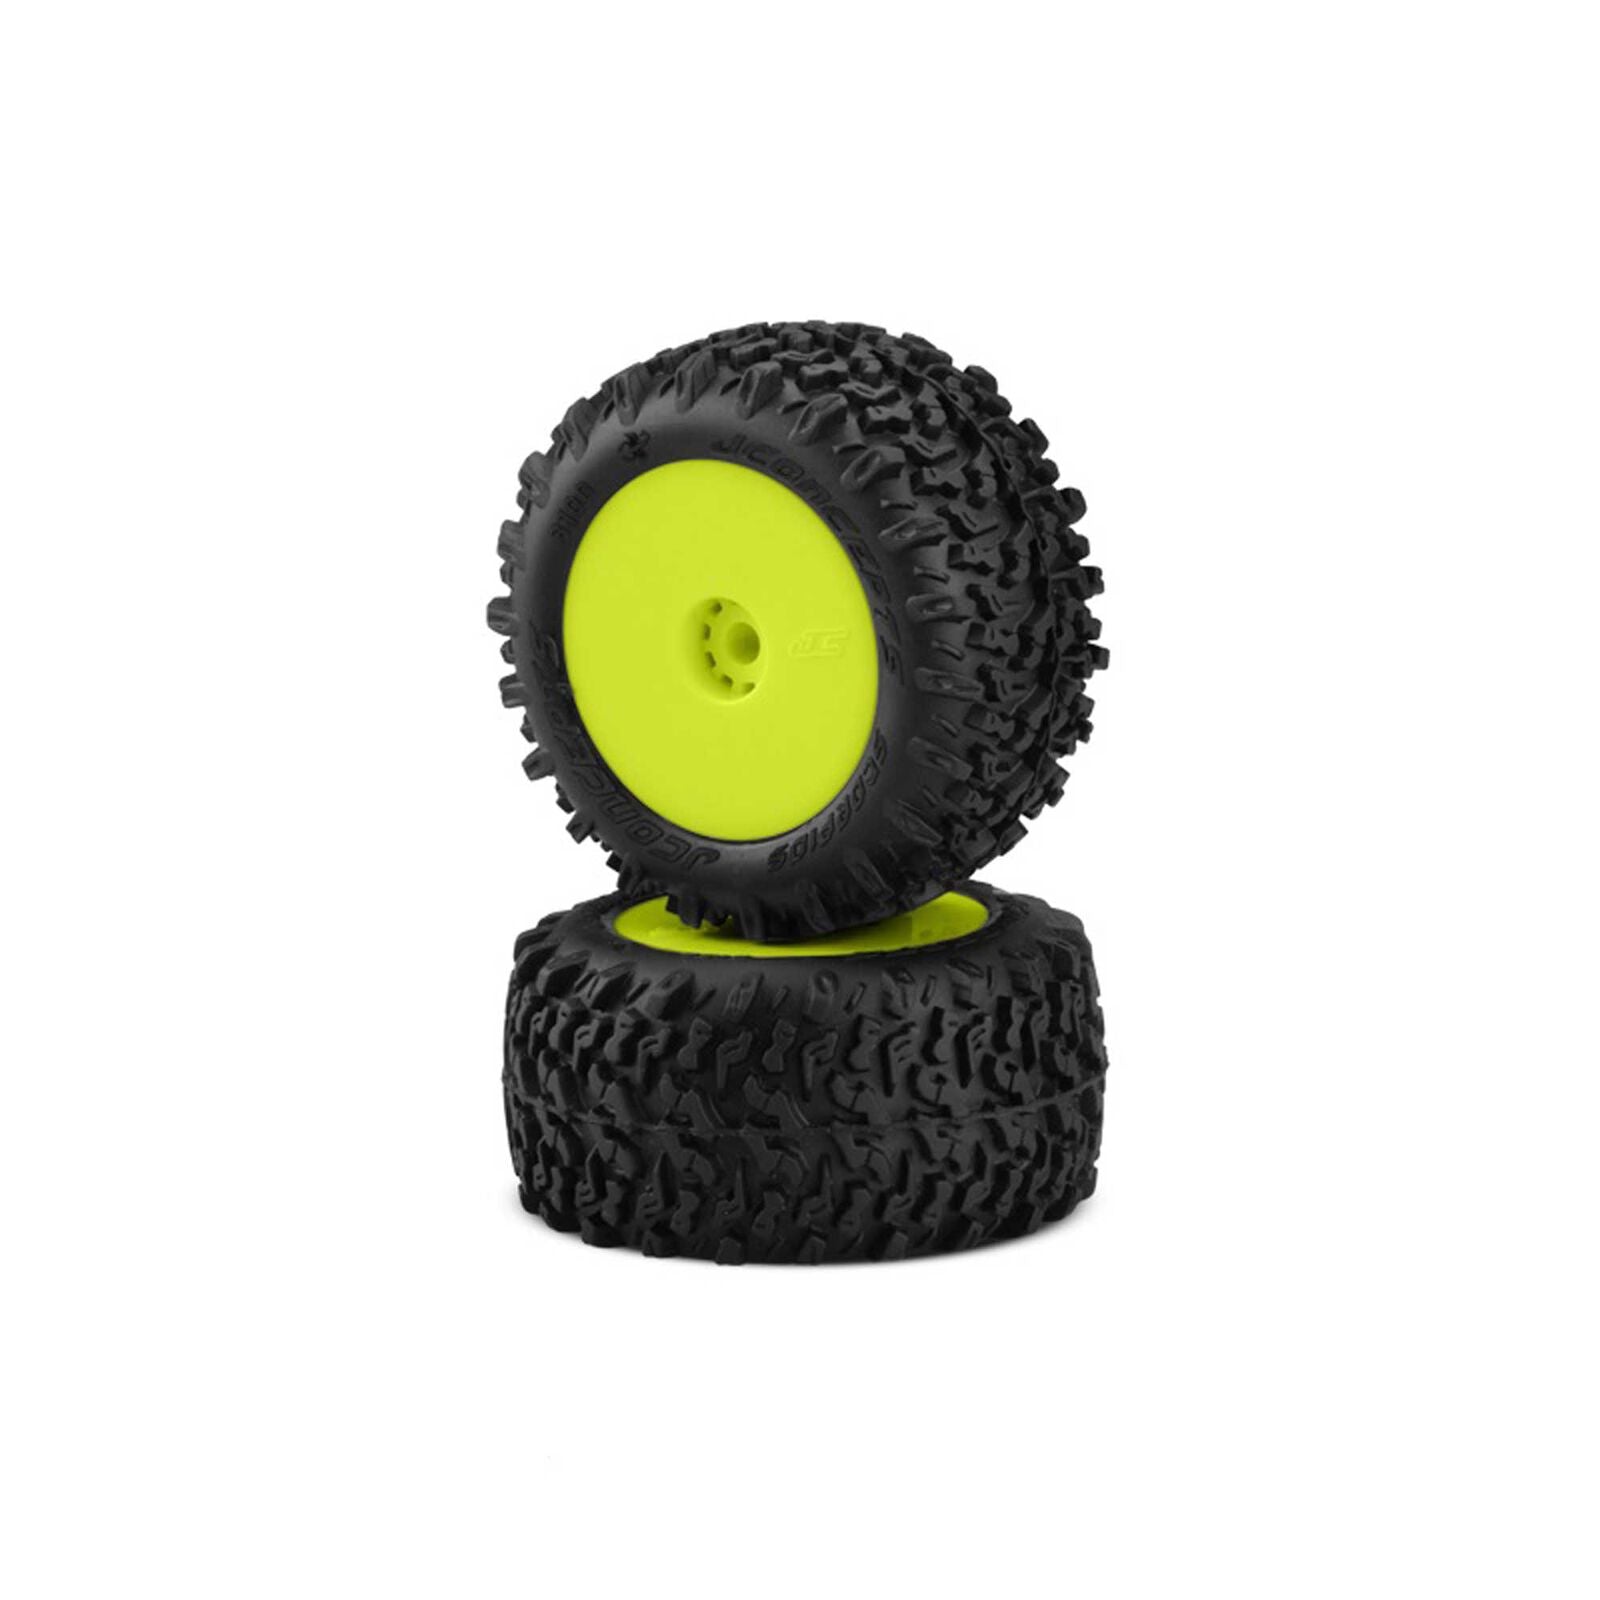 JCONCEPTS 3100-2221 Scorpios Tires, Mounted Yellow Wheels, Green Compound (2): Mini-T/B